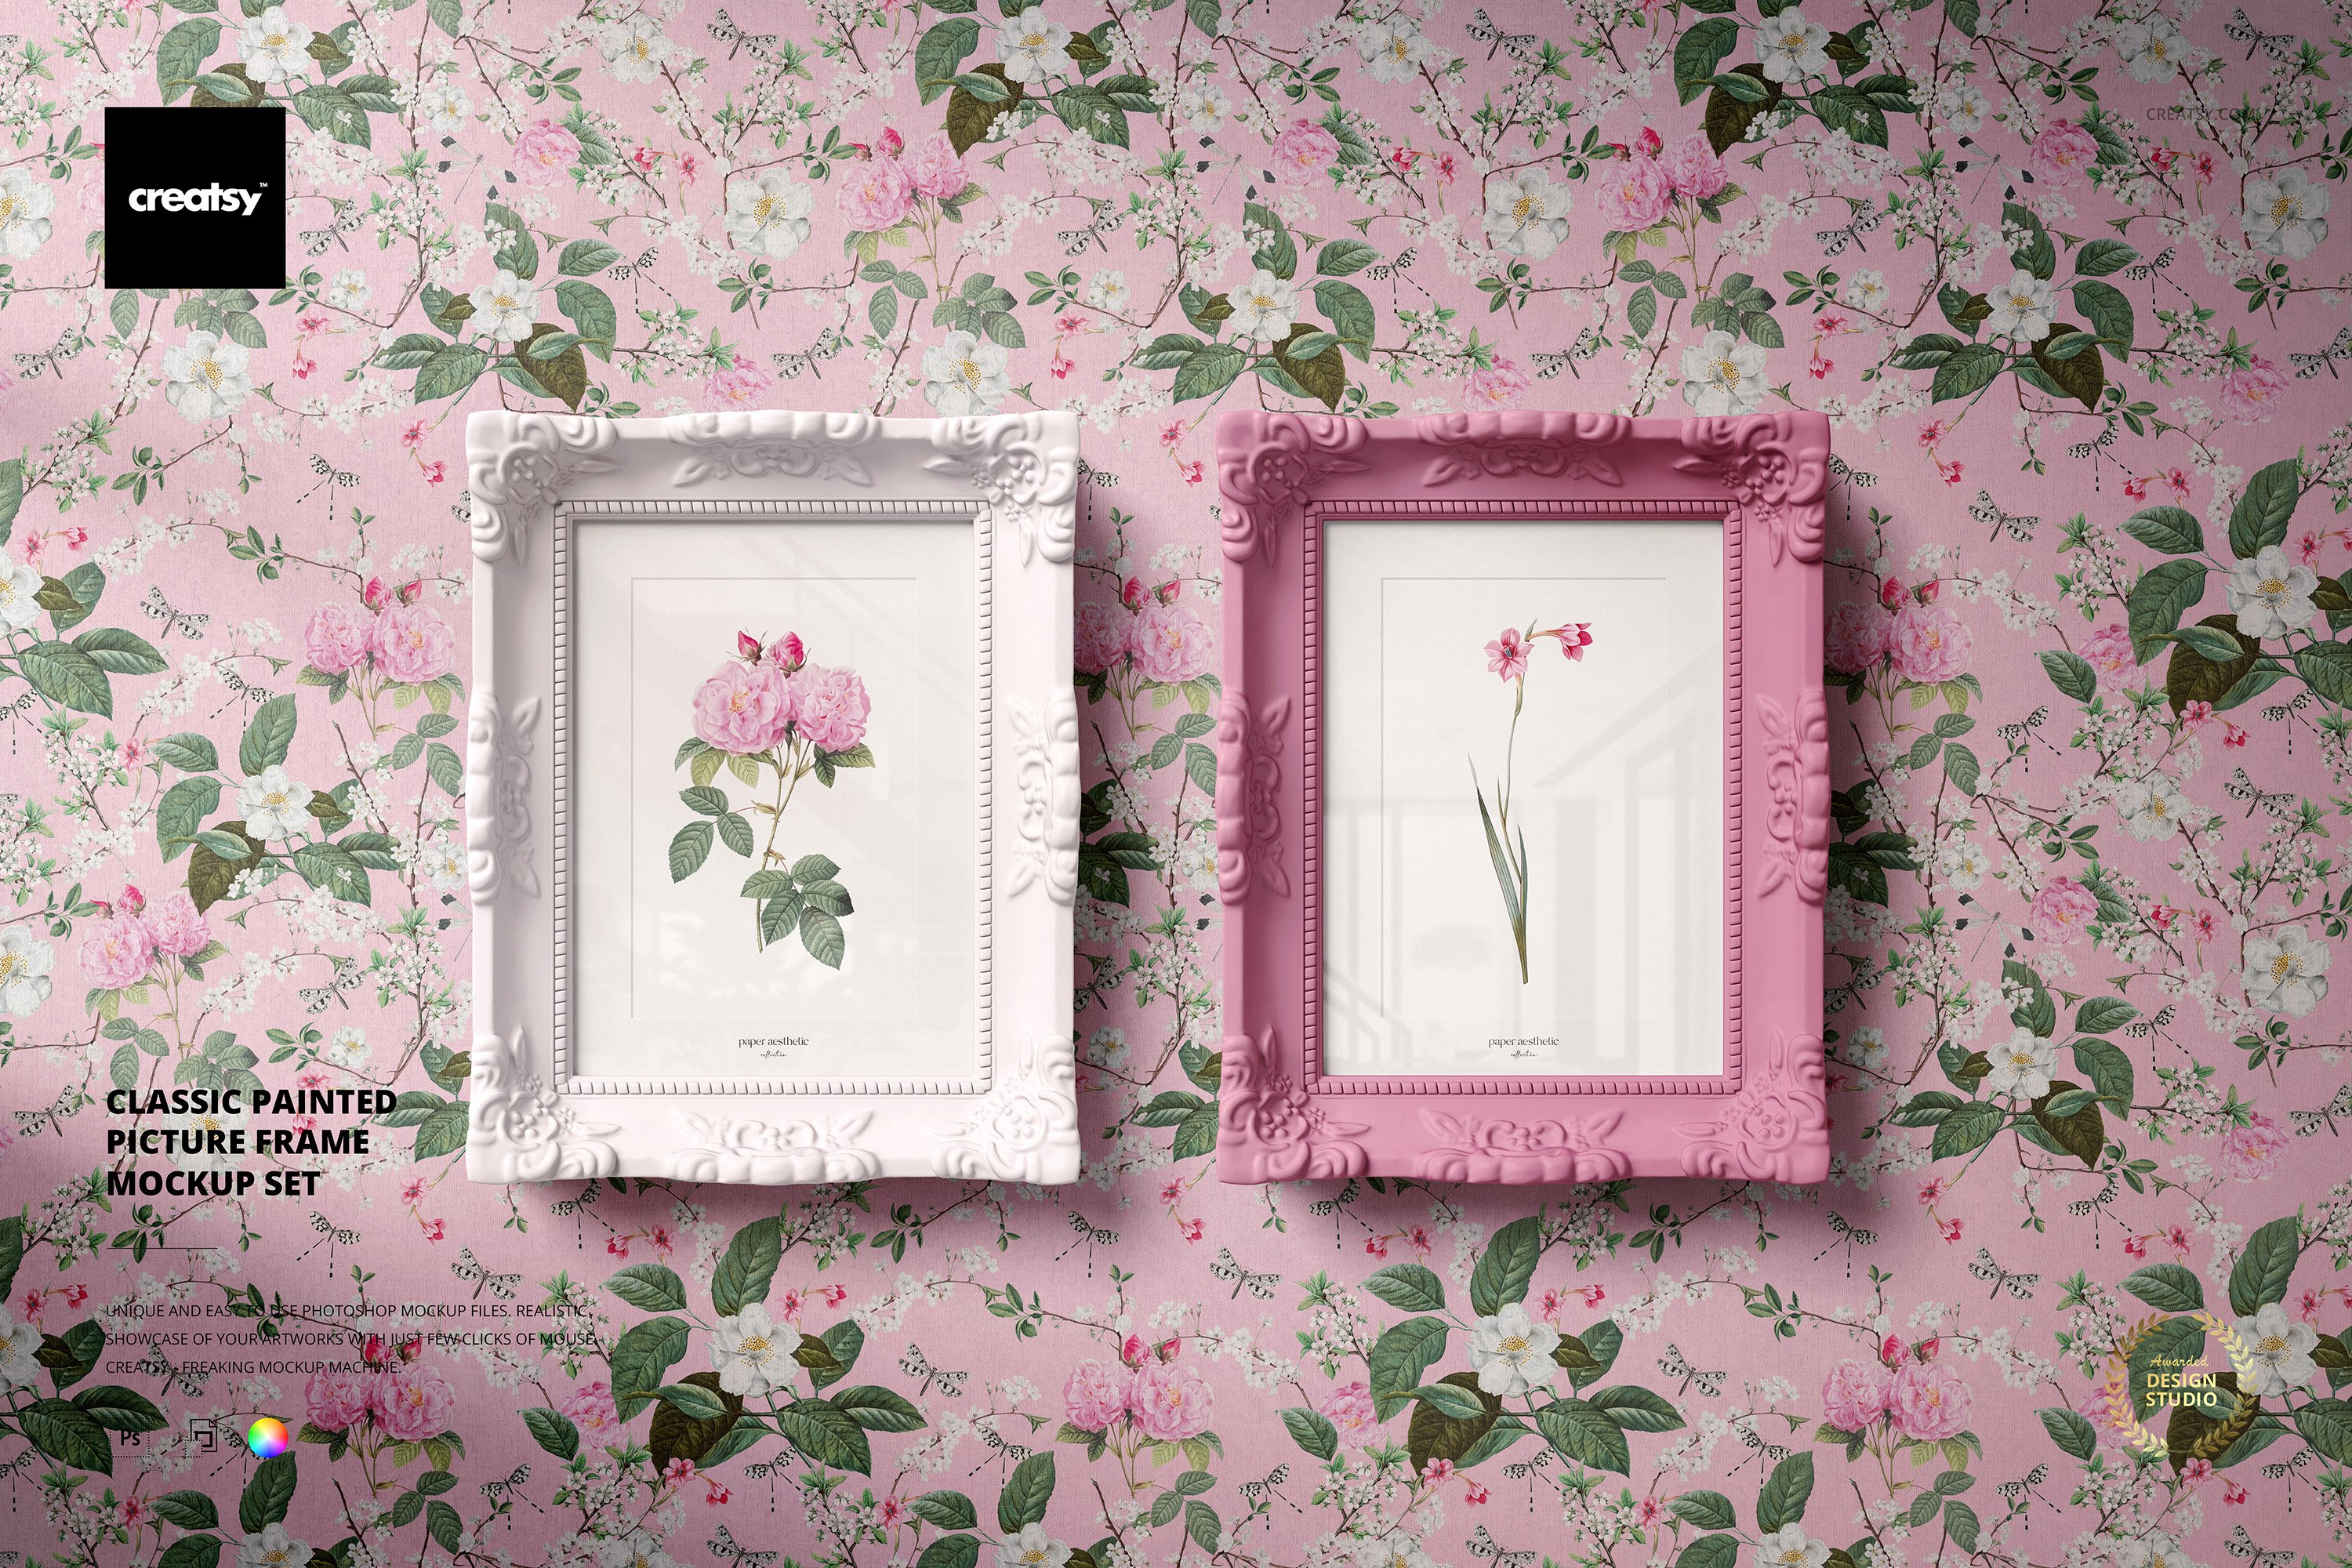 Classic Painted Picture Frame Mockup cover image.